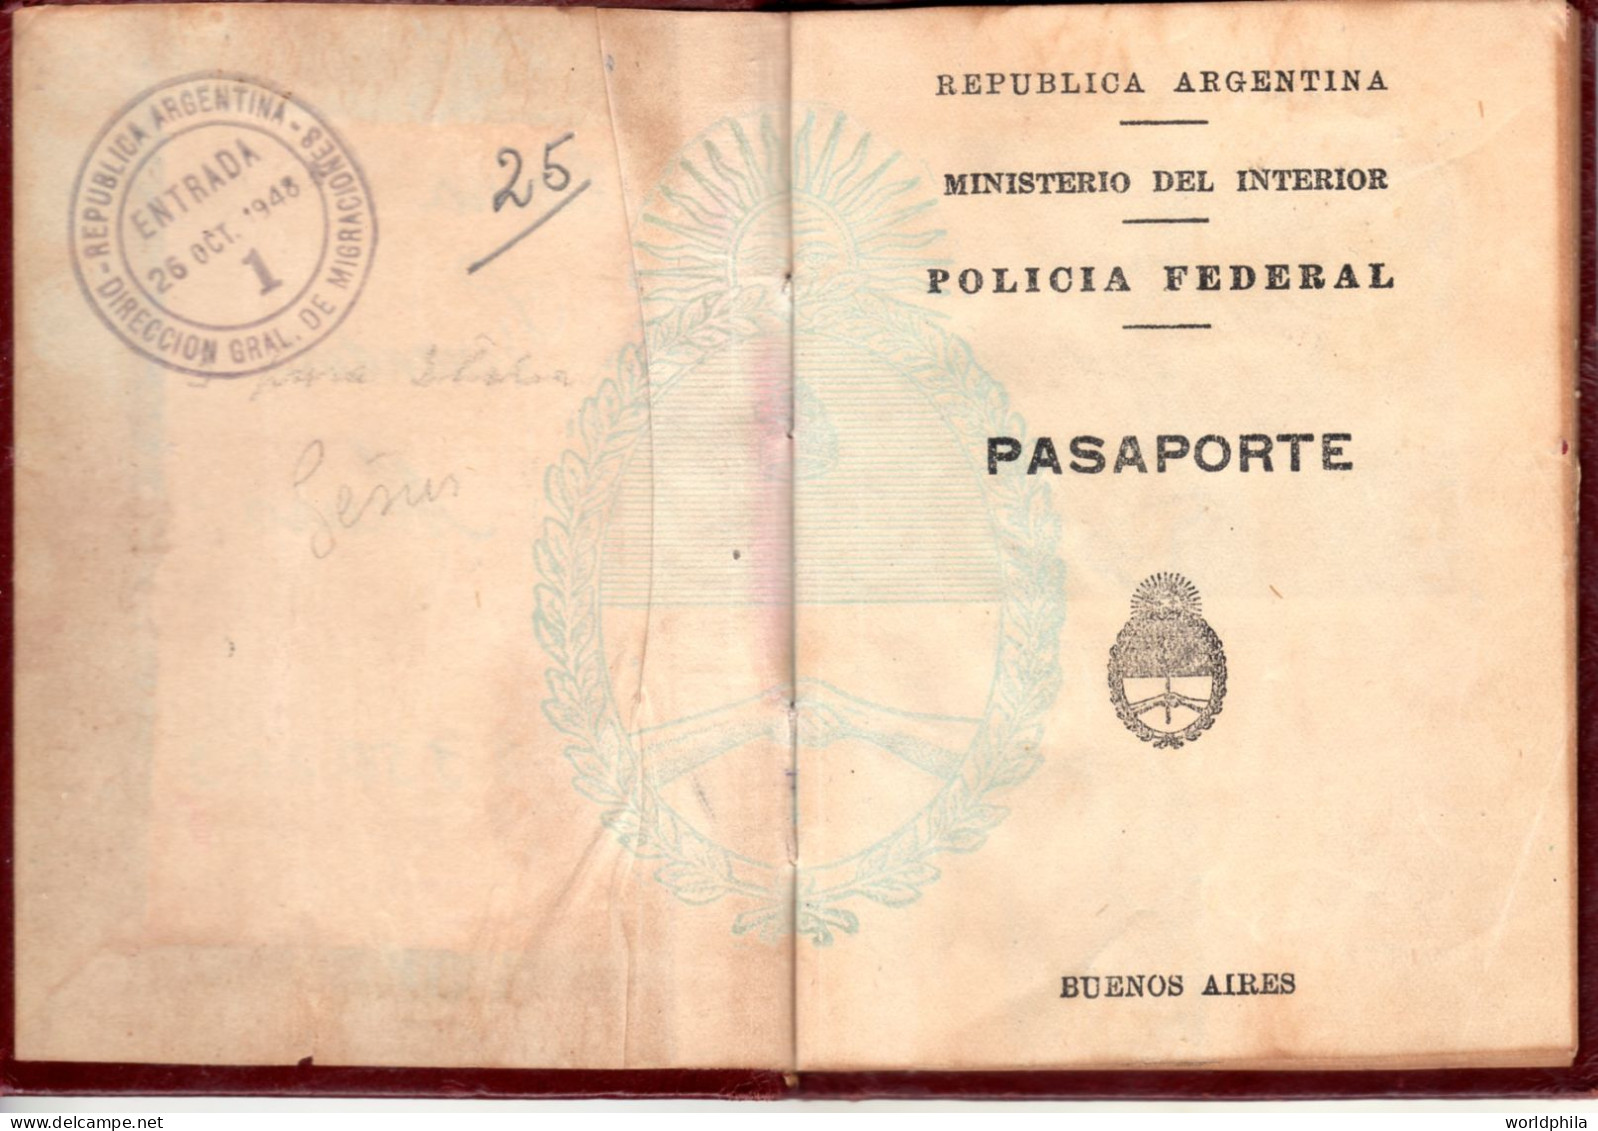 Argentina 1948 much travelled document, Europe, many revenue stamps. signed Passport History document